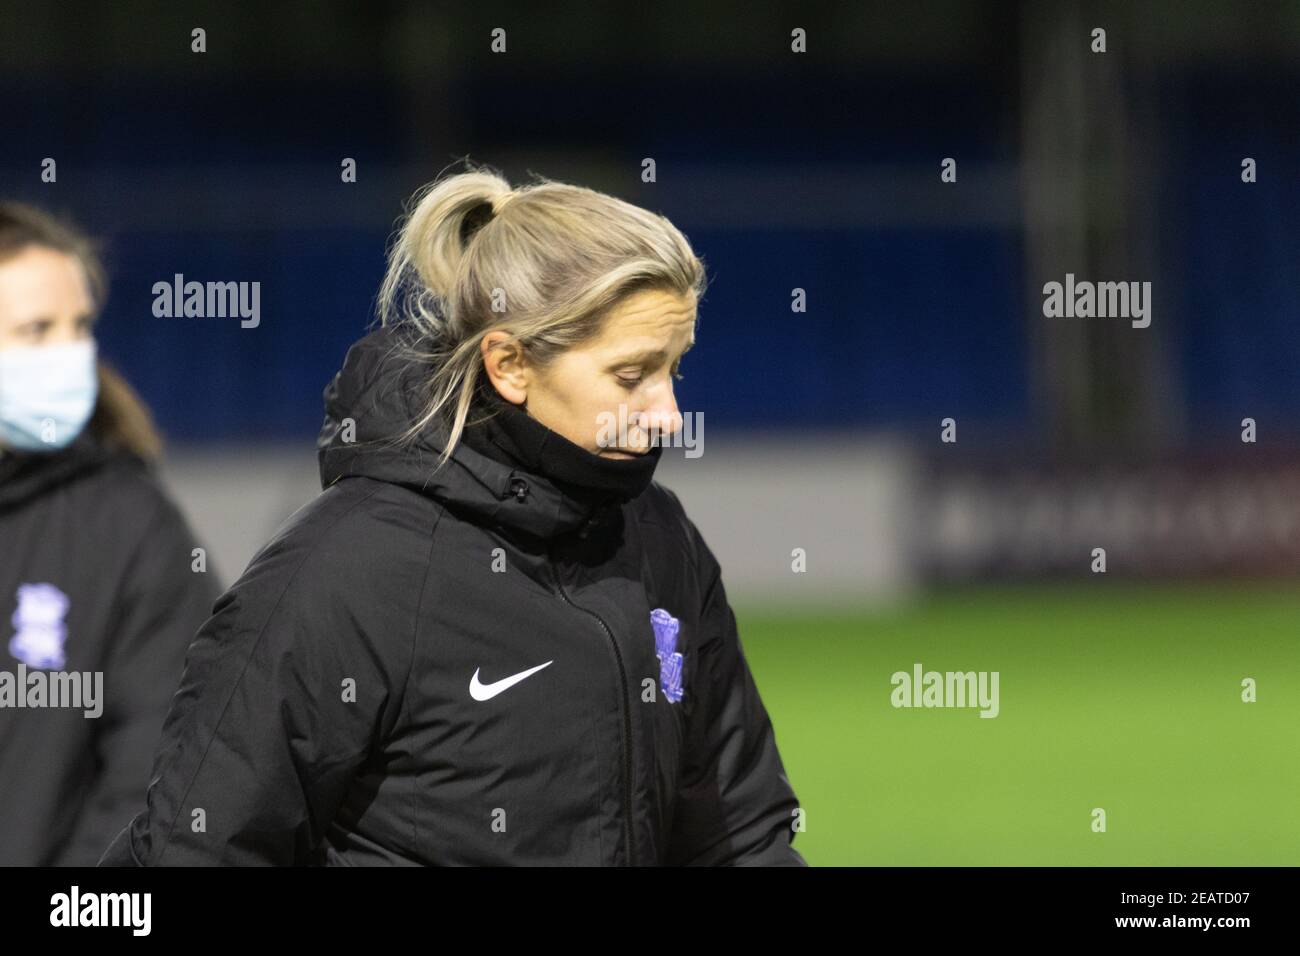 Solihull, West Midlands, 10th February, 2021. Womes Super League match between Birmingham rivals Birmingham City FC and Aston Villa at the Solihull Moors ground, Solihull has been postponed due to a frozen pitch. Birmingham City manager Carla Ward after the announcement. Credit: Peter Lopeman/Alamy Live News Stock Photo